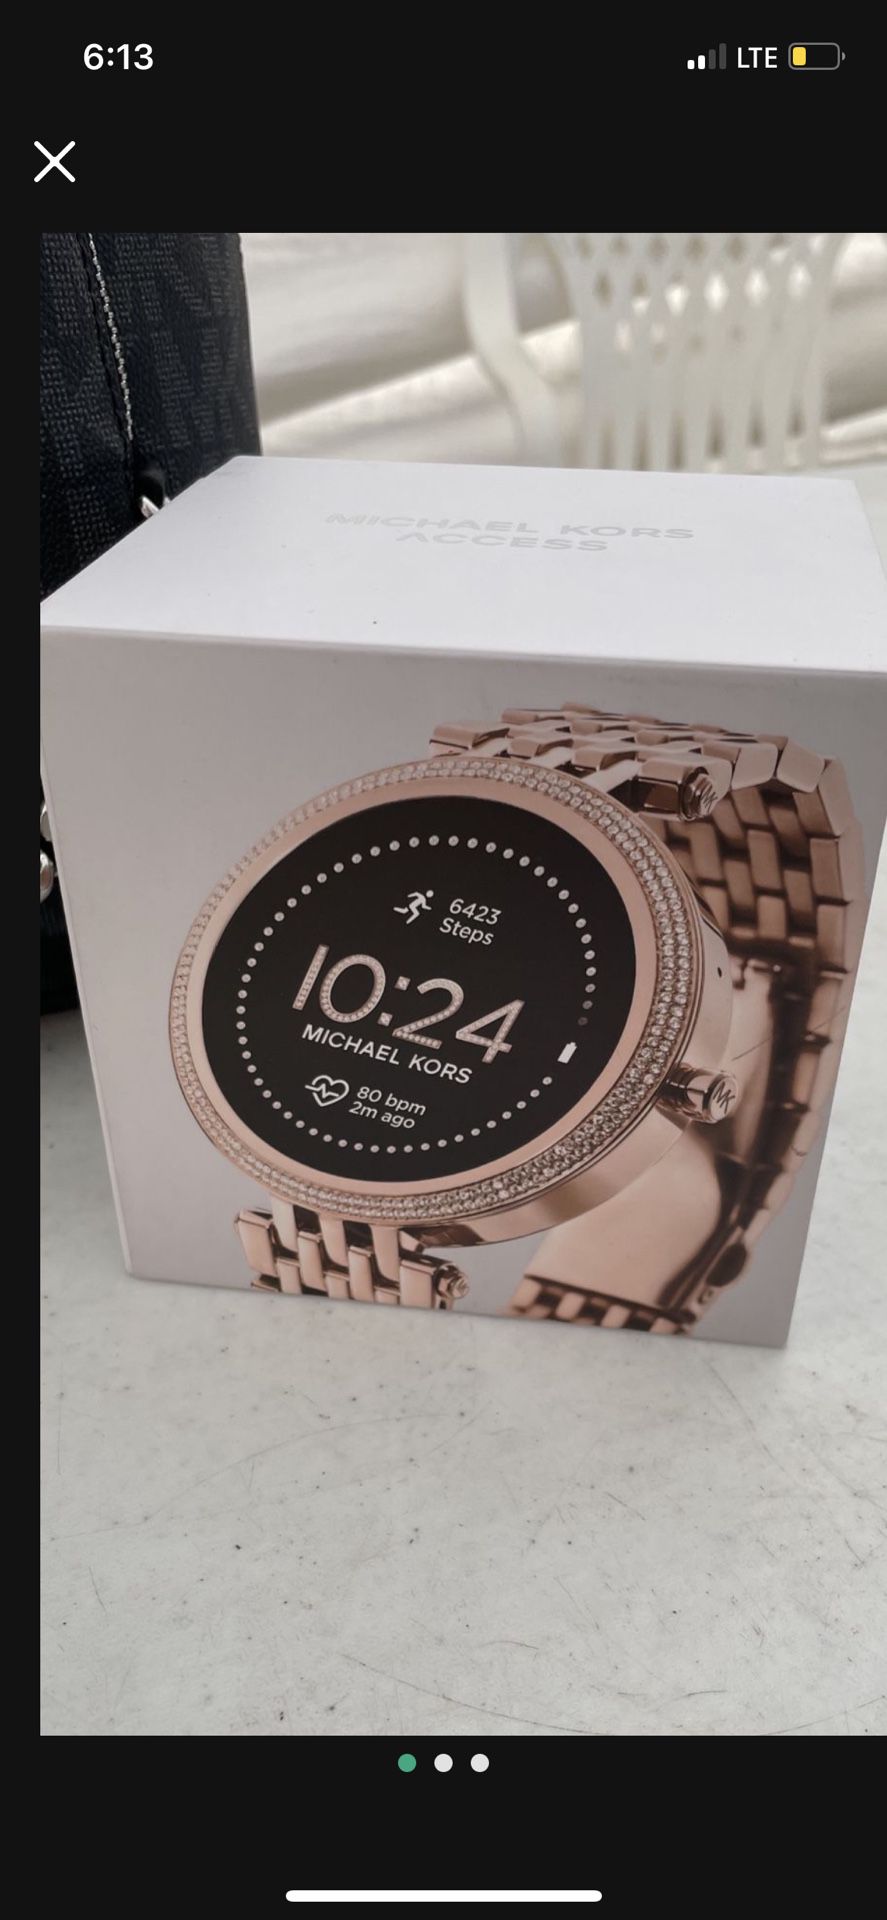 Michael Kors Women's Gen 5e Darci Rose Gold Stainless Steel Smartwatch, 43mm - Rose Gold NEW serious inquiries only  Pick up location in the city Pico